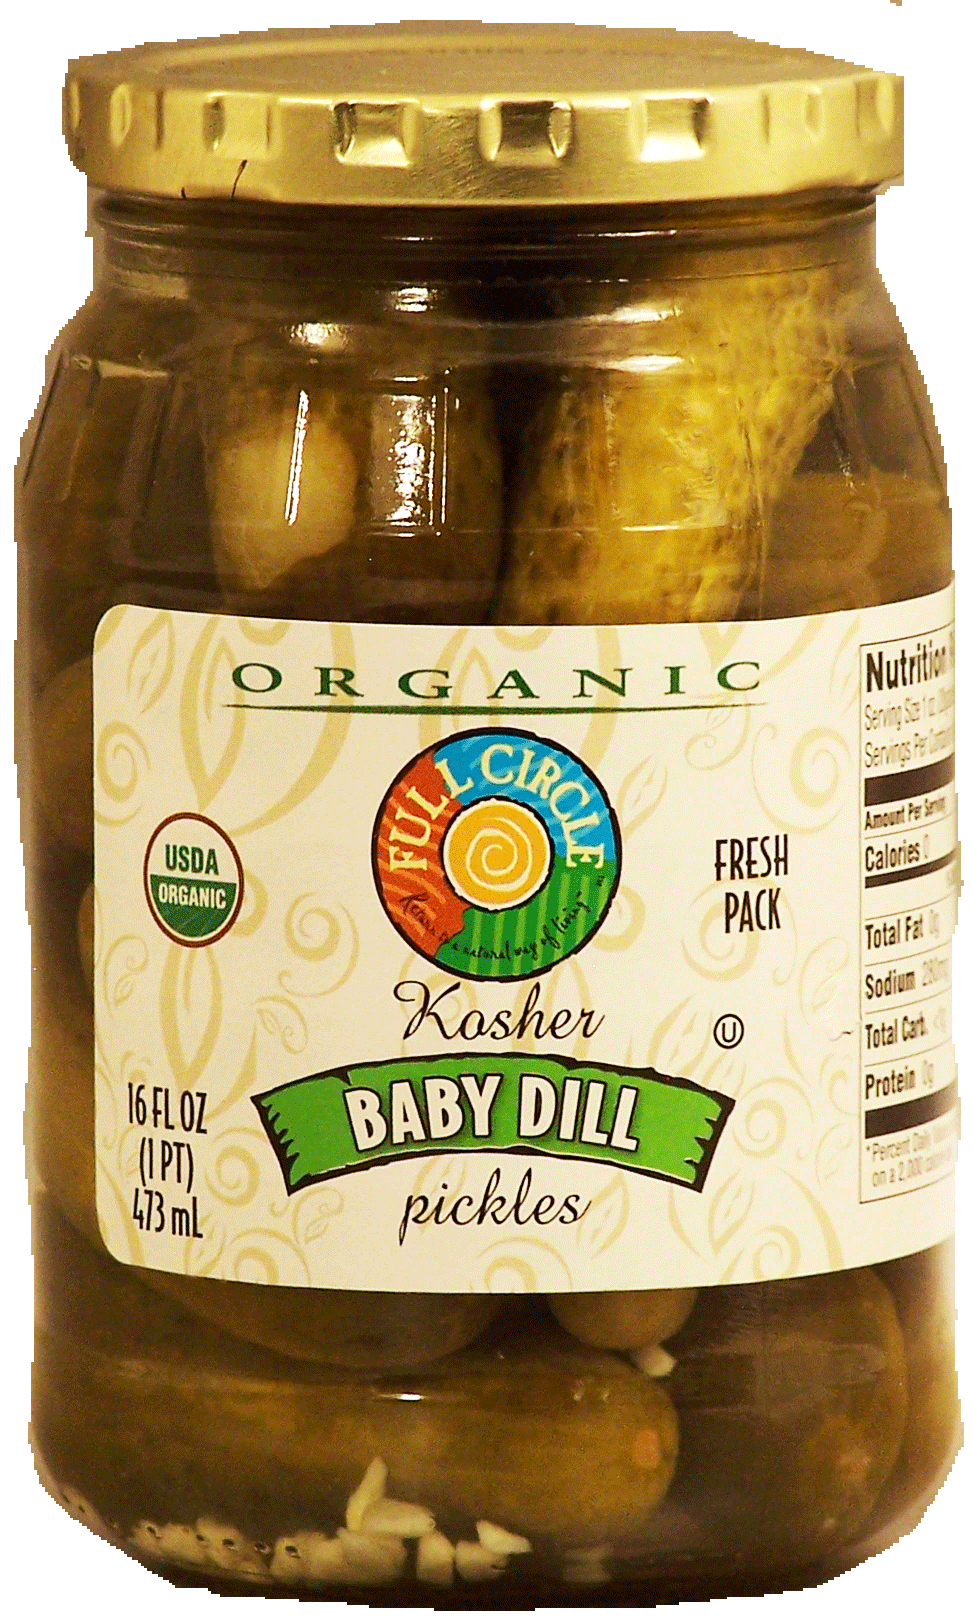 Full Circle Organic kosher baby dill pickles Full-Size Picture